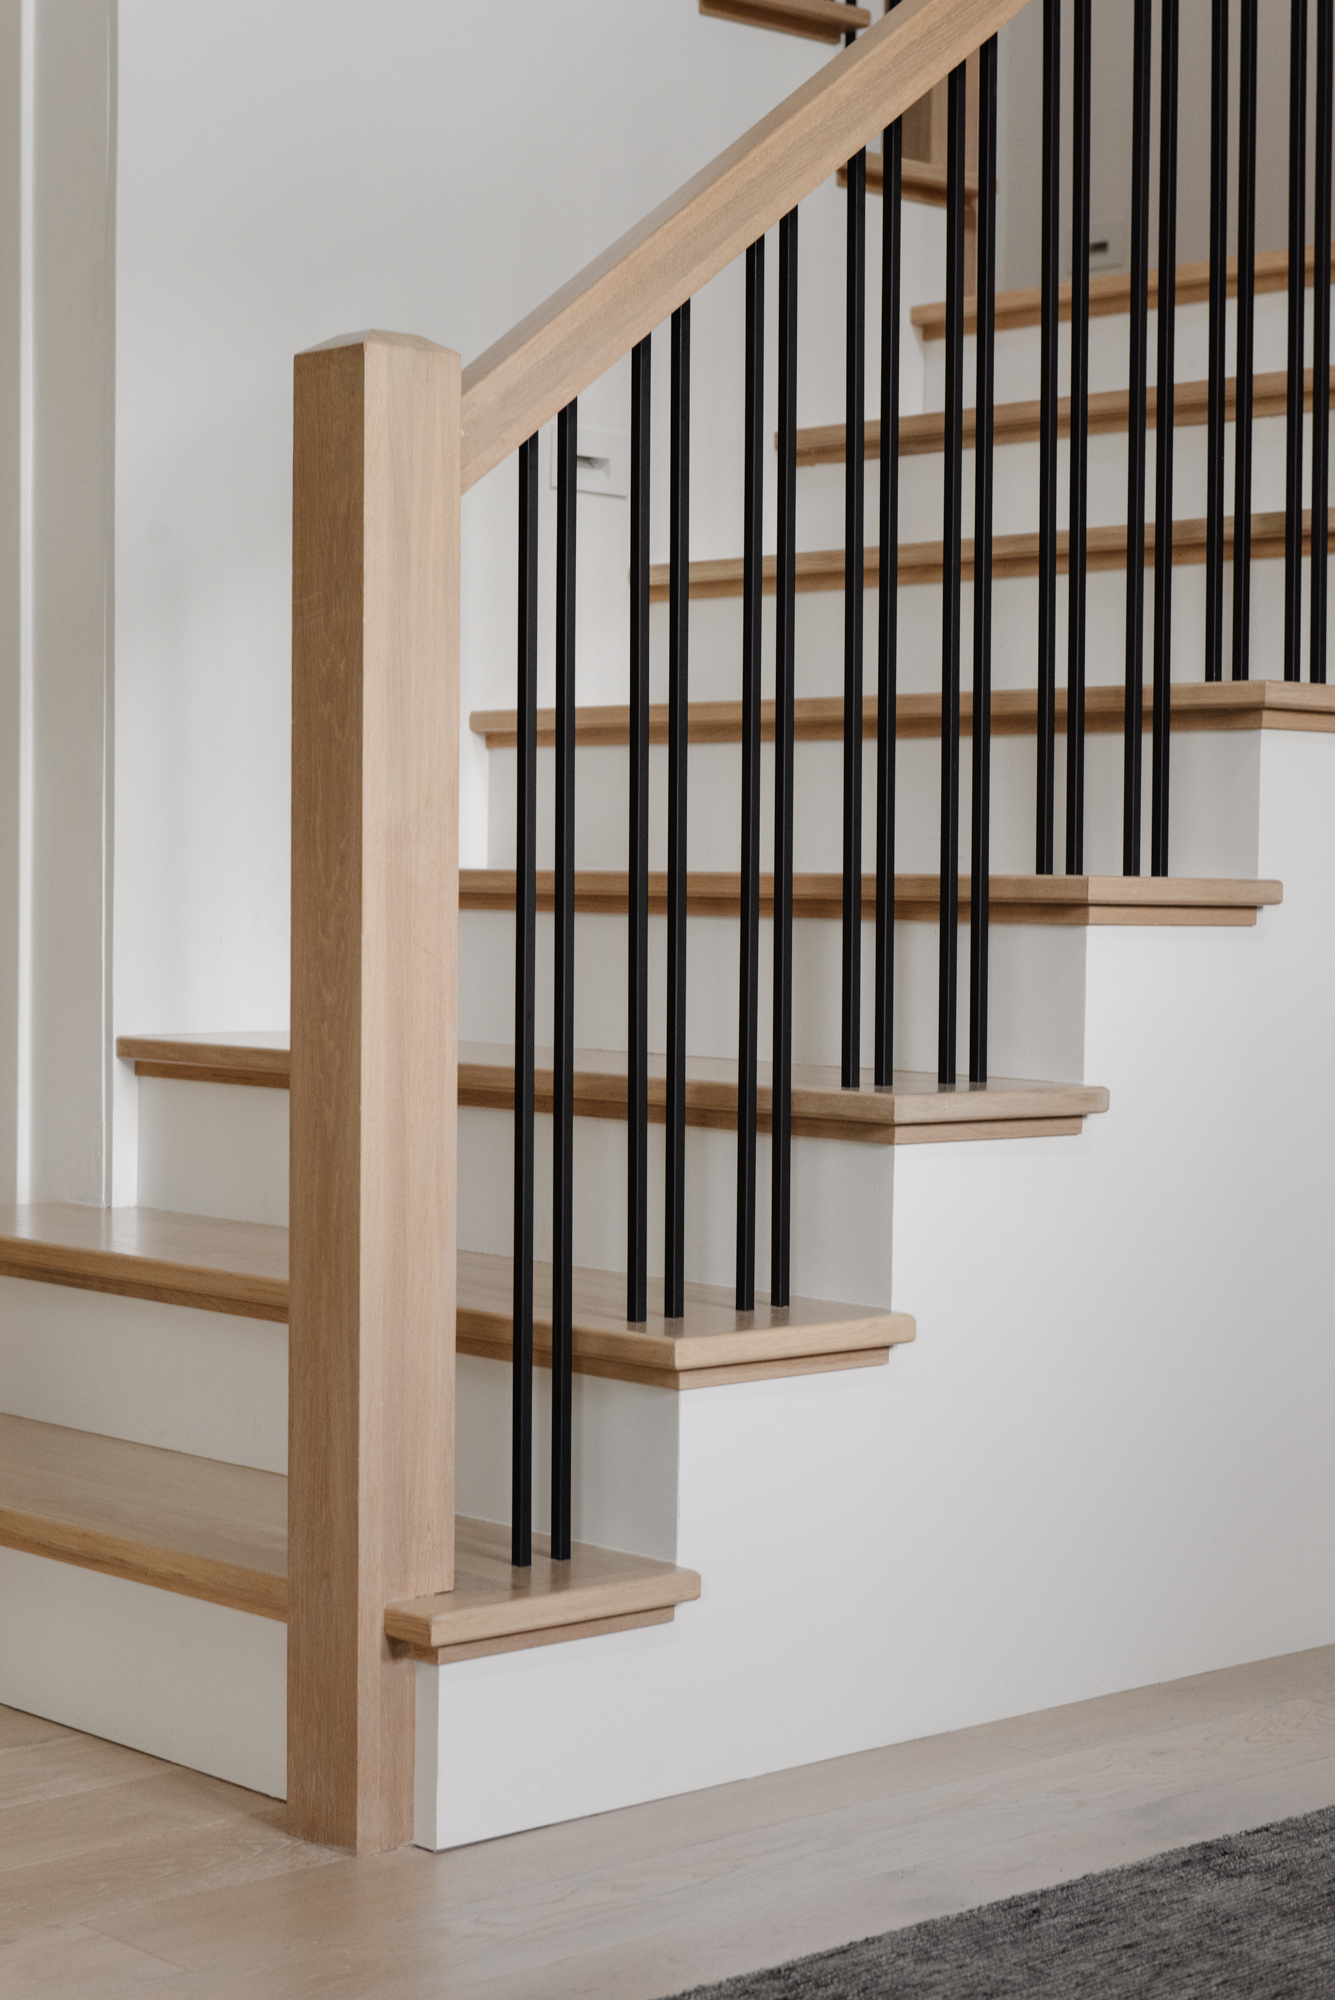 Modern floating stairs white white oak and iron balusters. Interior Design by LC Interiors, best interior designer in Naperville, Illinois.